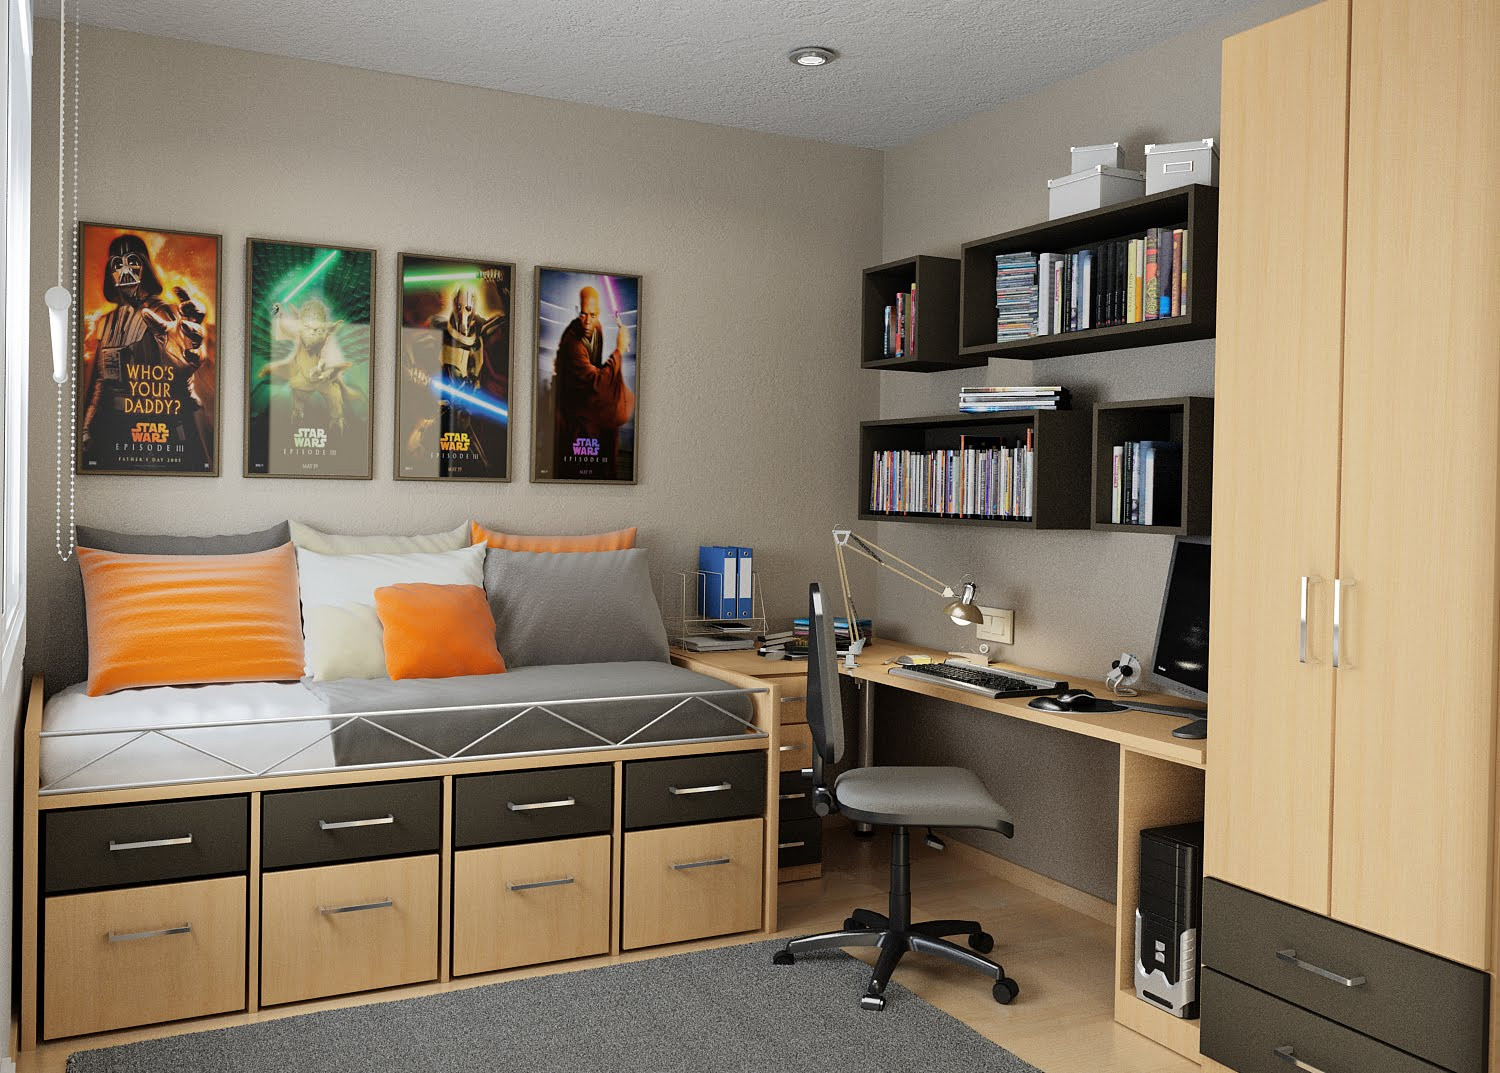 Small Bedroom Storage
 Small Bedroom Storage Solutions Designed to Save up Space